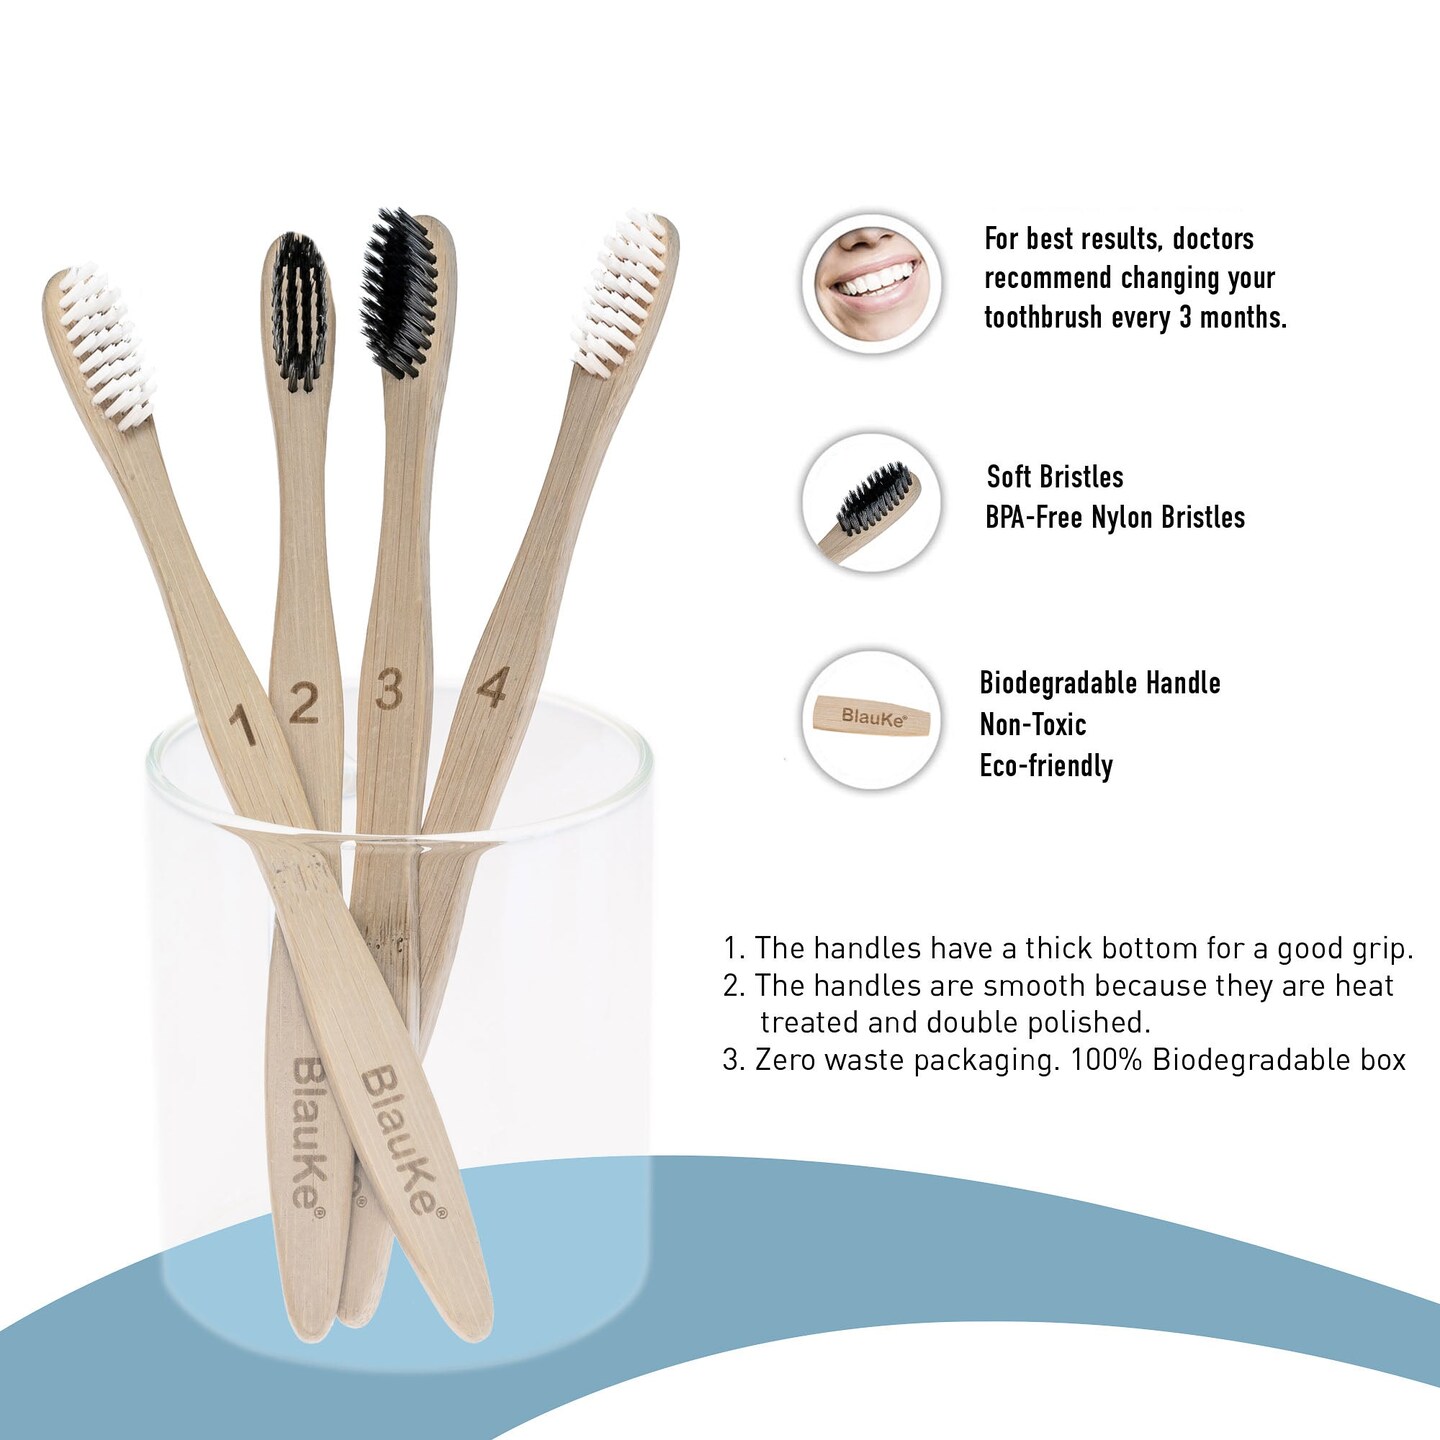 BlauKe&#xAE; Bamboo Toothbrush Set 4-Pack - Bamboo Toothbrushes with Soft Bristles for Adults - Eco-Friendly, Biodegradable, Natural Wooden Toothbrushes